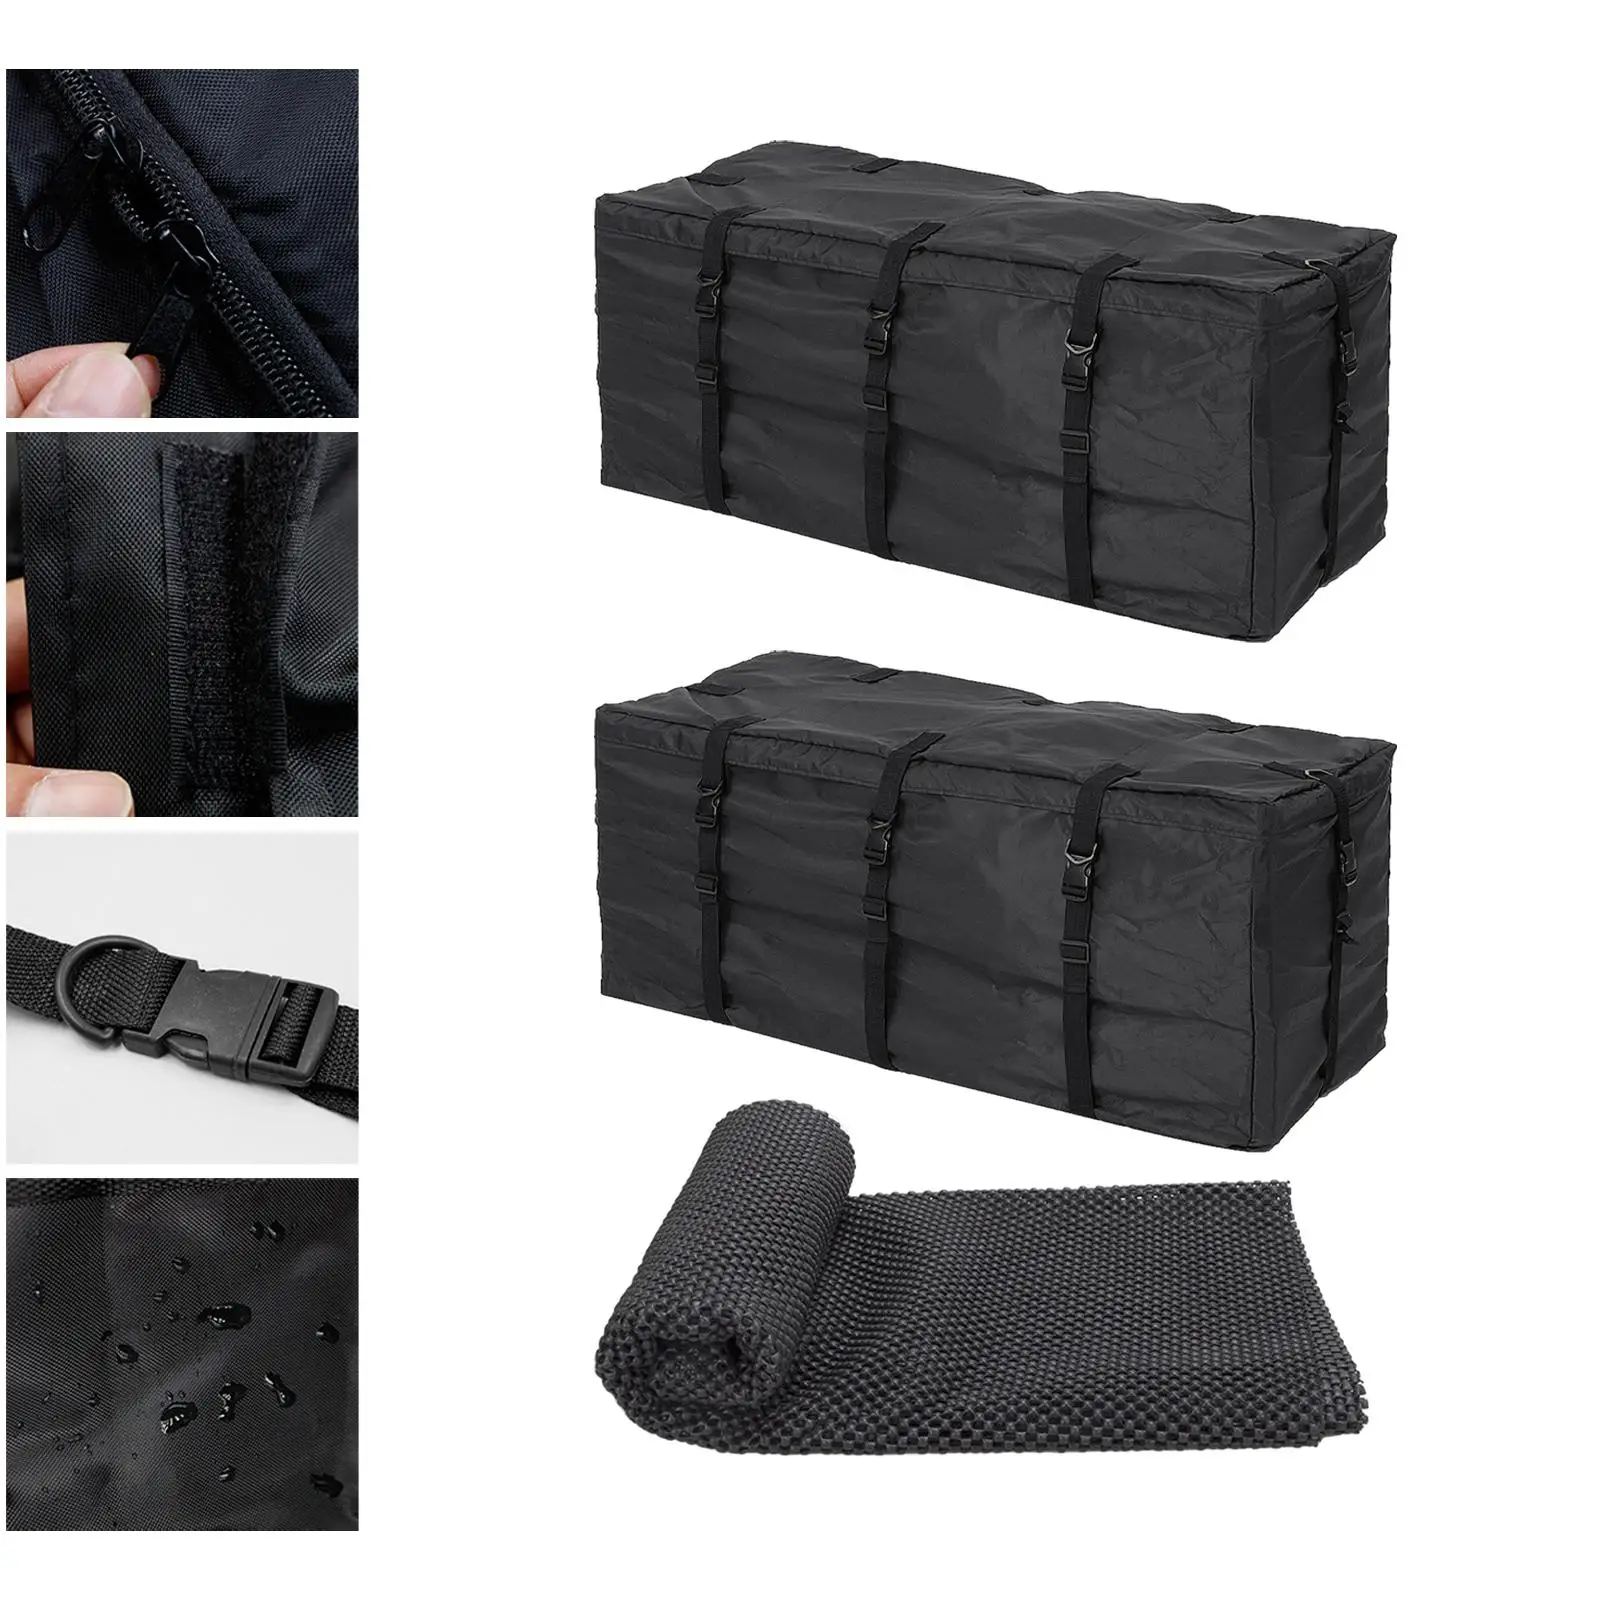 Rooftop Cargo Carrier Bag Luggage Storage Travel Accessories Durable Waterproof Rooftop Carrier Bag for Cars Vehicles SUV